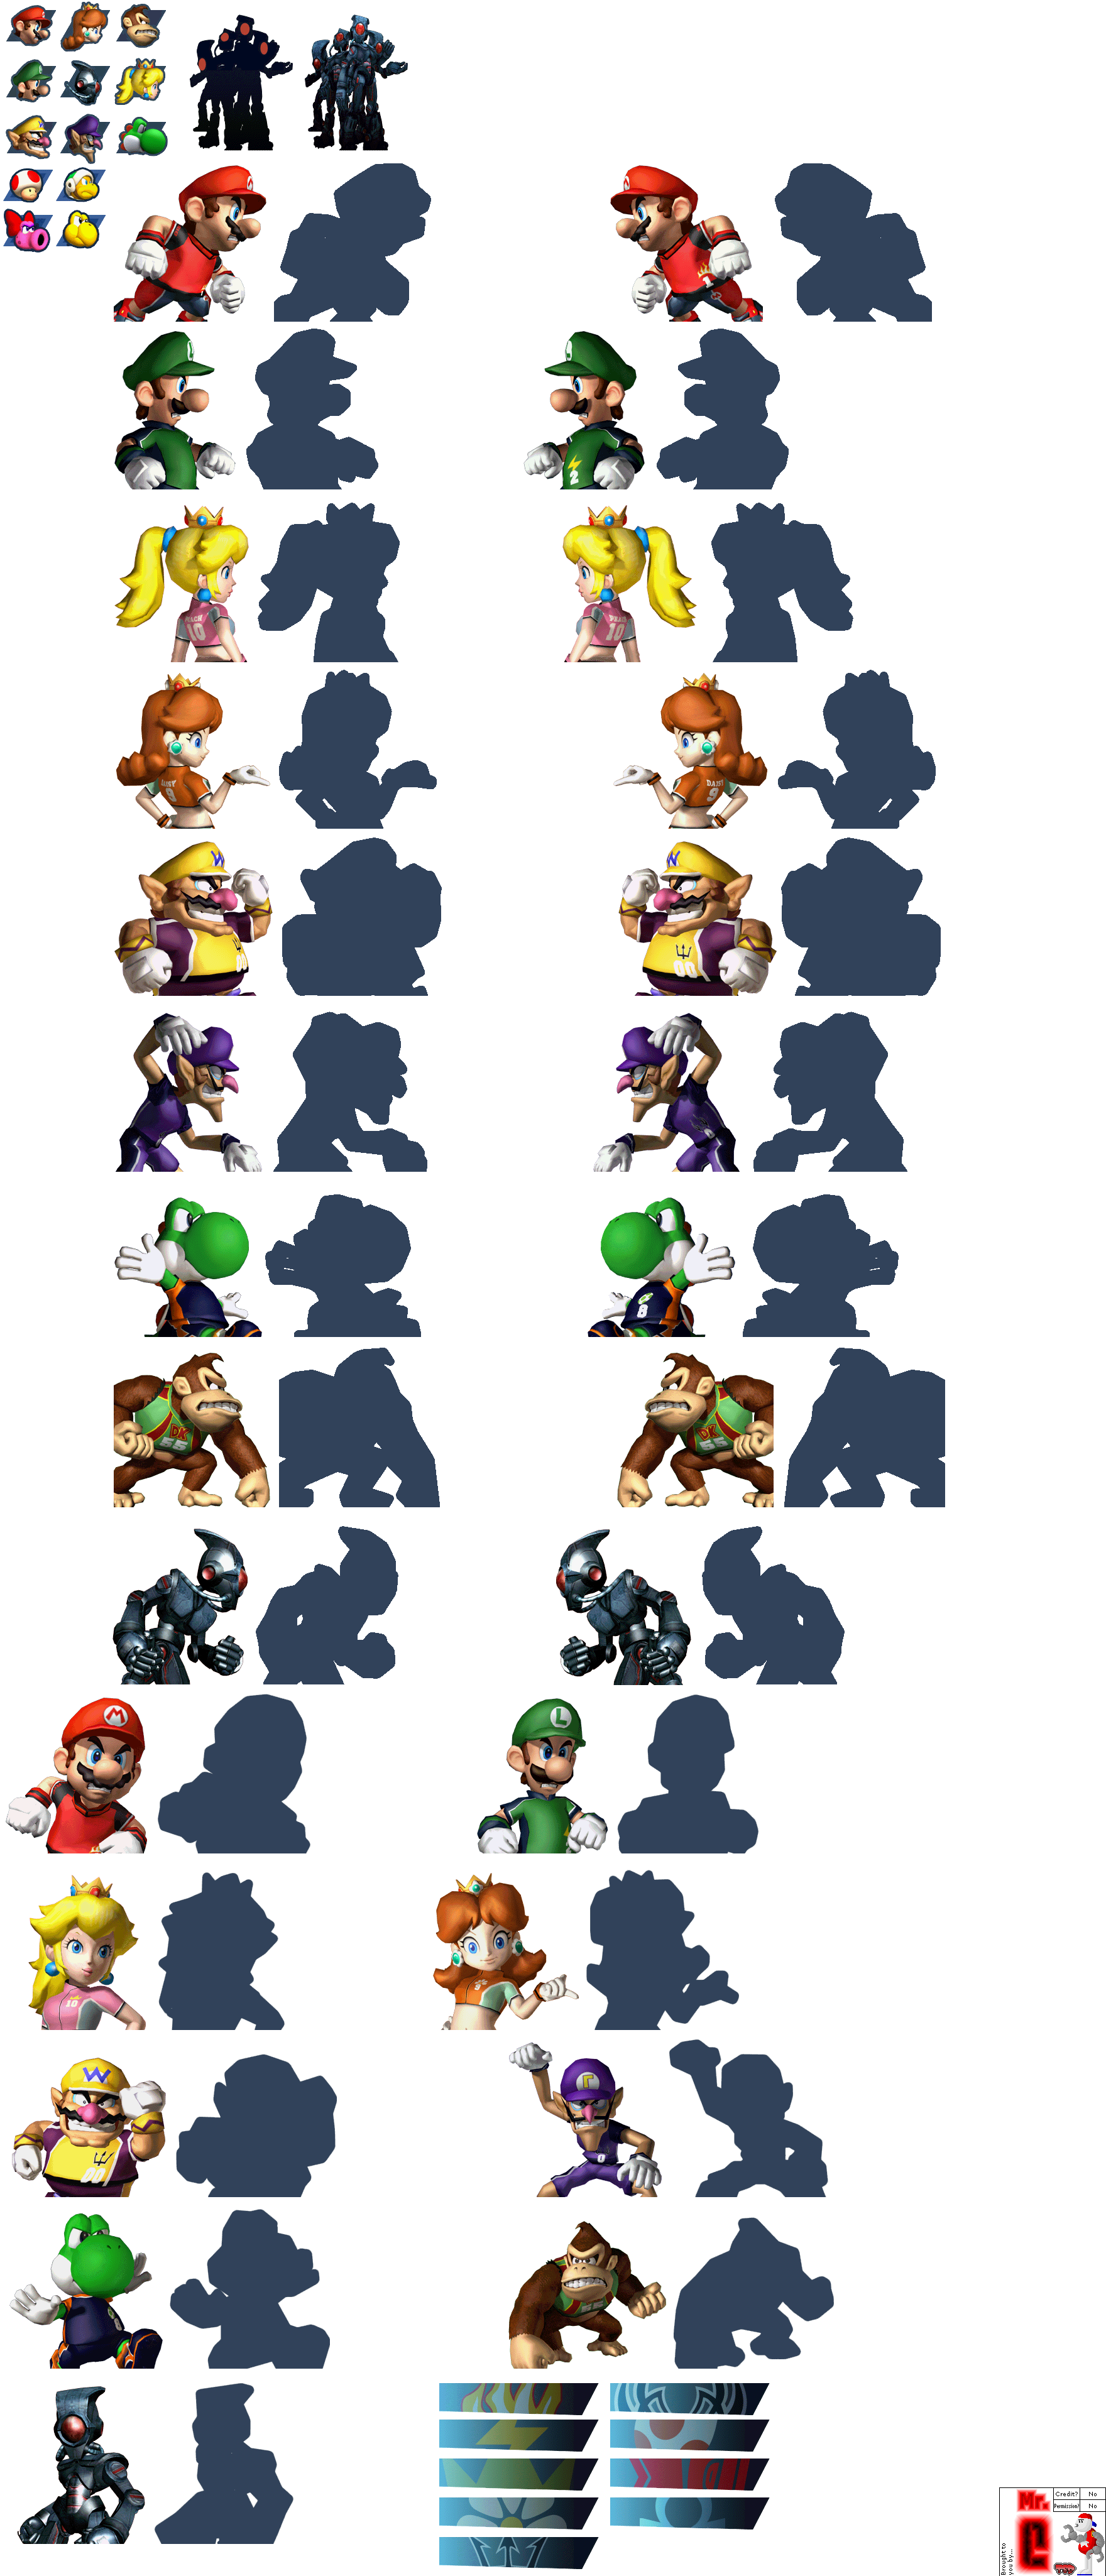 Super Mario Strikers - Character Icons & Portraits